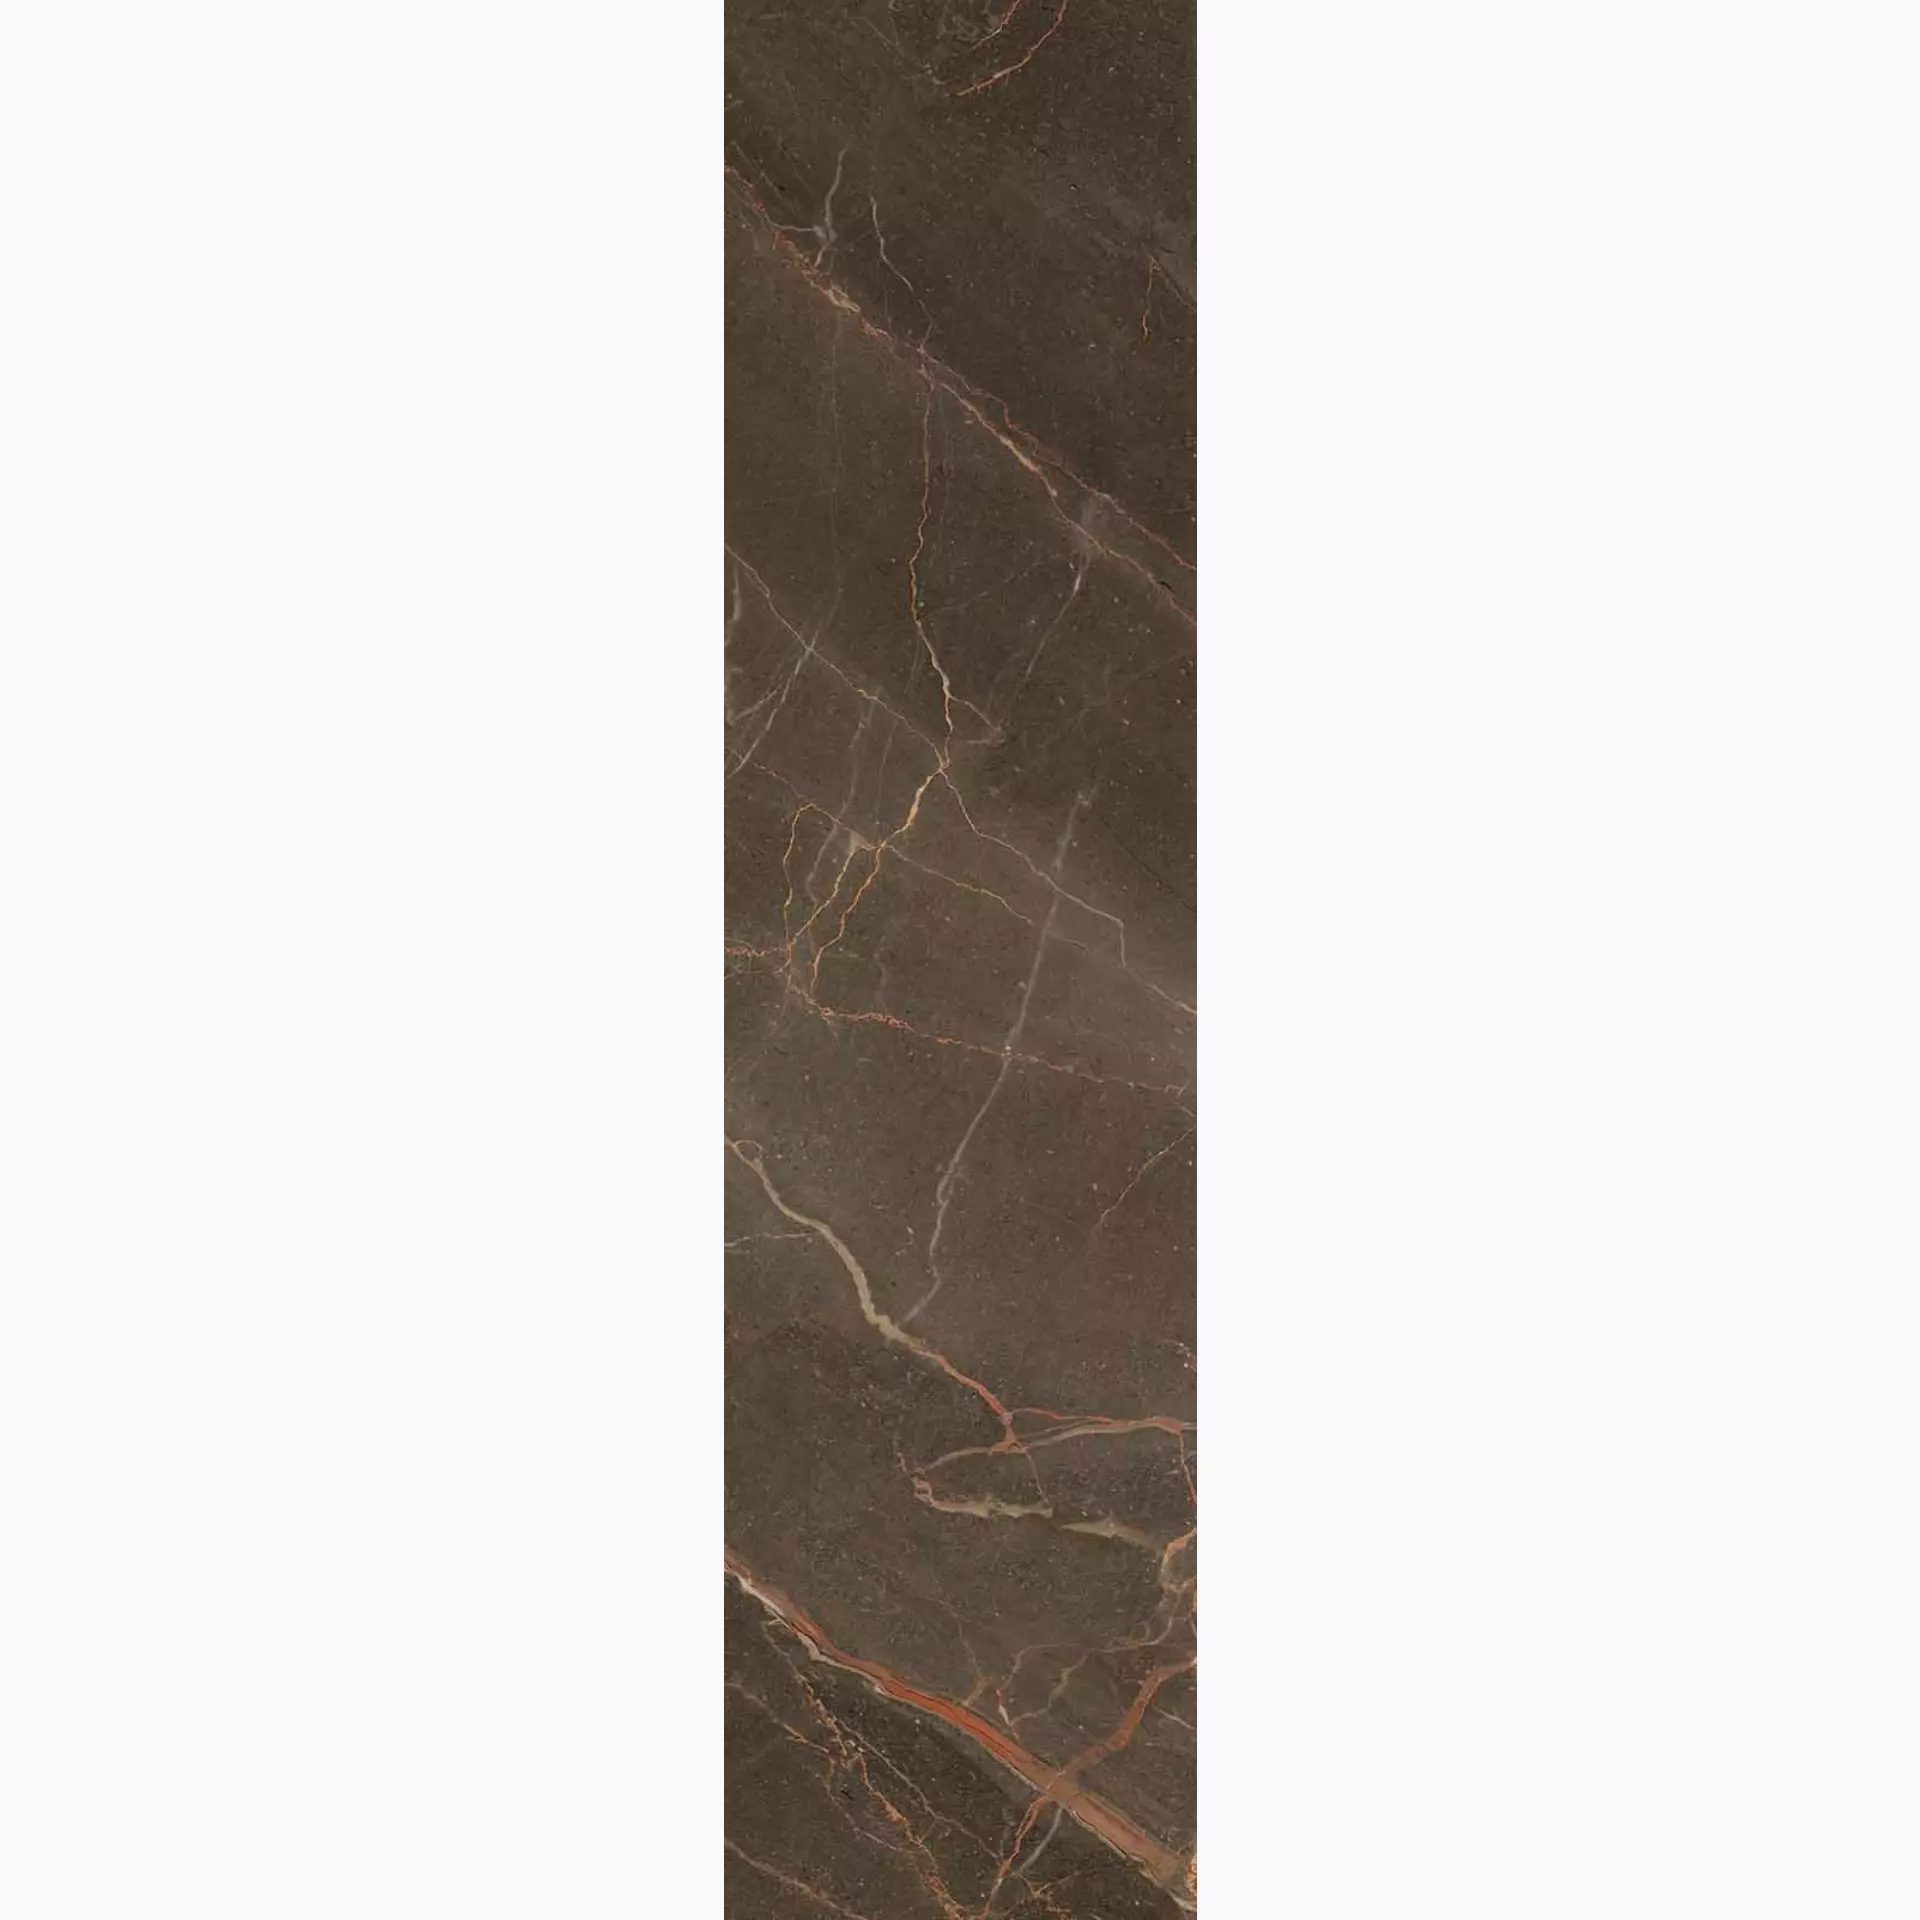 Keope 9Cento Ombra Moca Lappato 46394533 30x120cm rectified 9mm